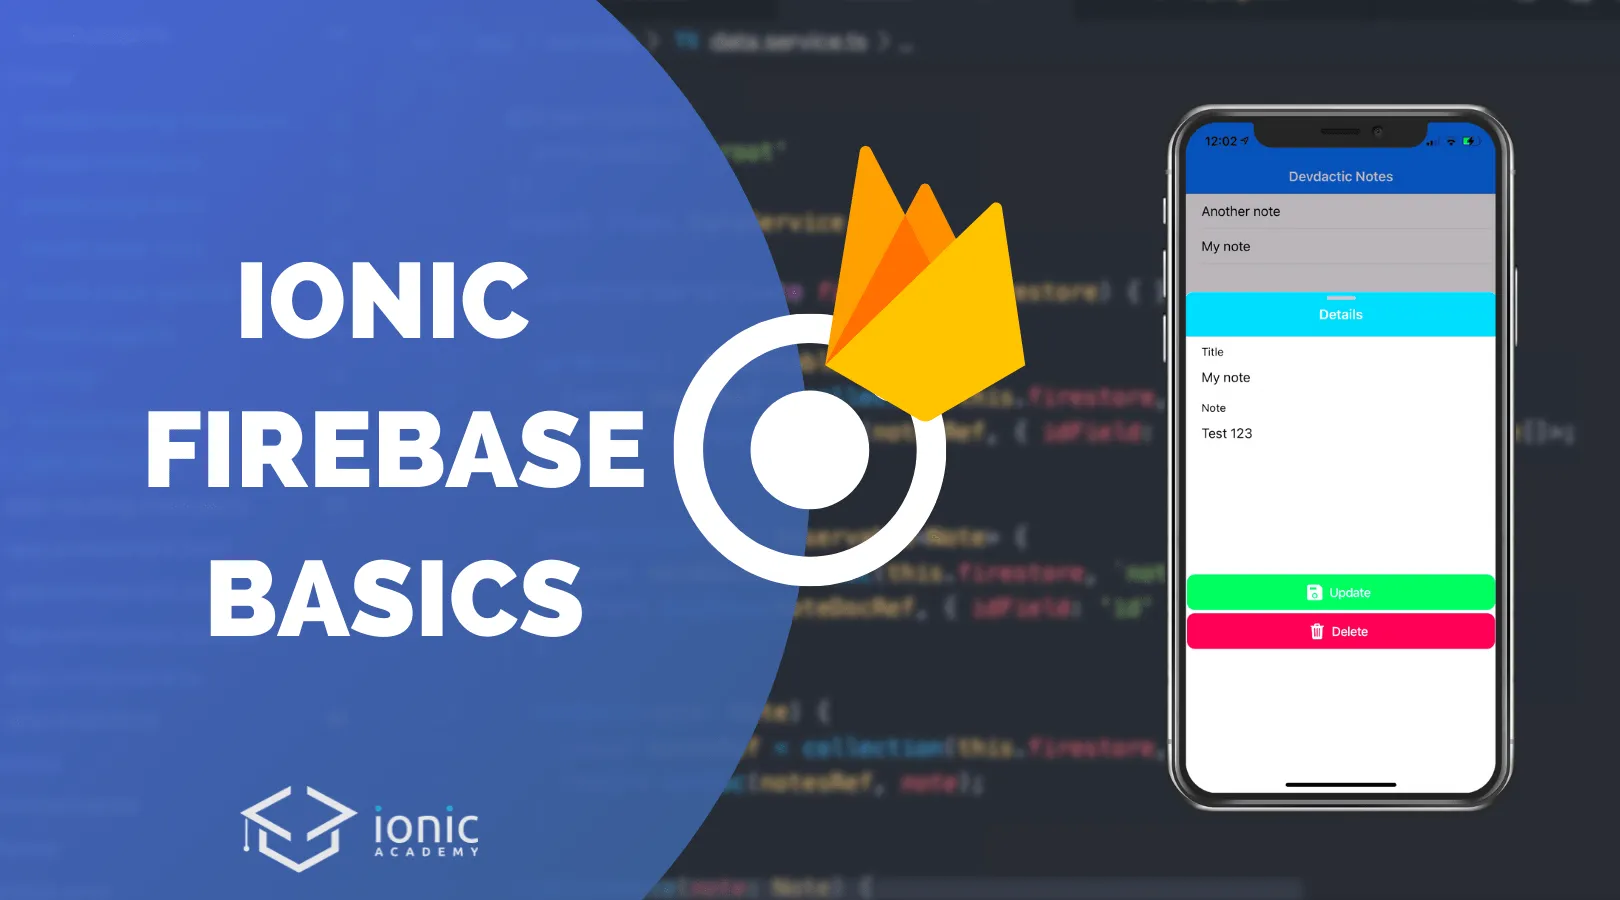 Build Your First Ionic App with Firebase using AngularFire 7